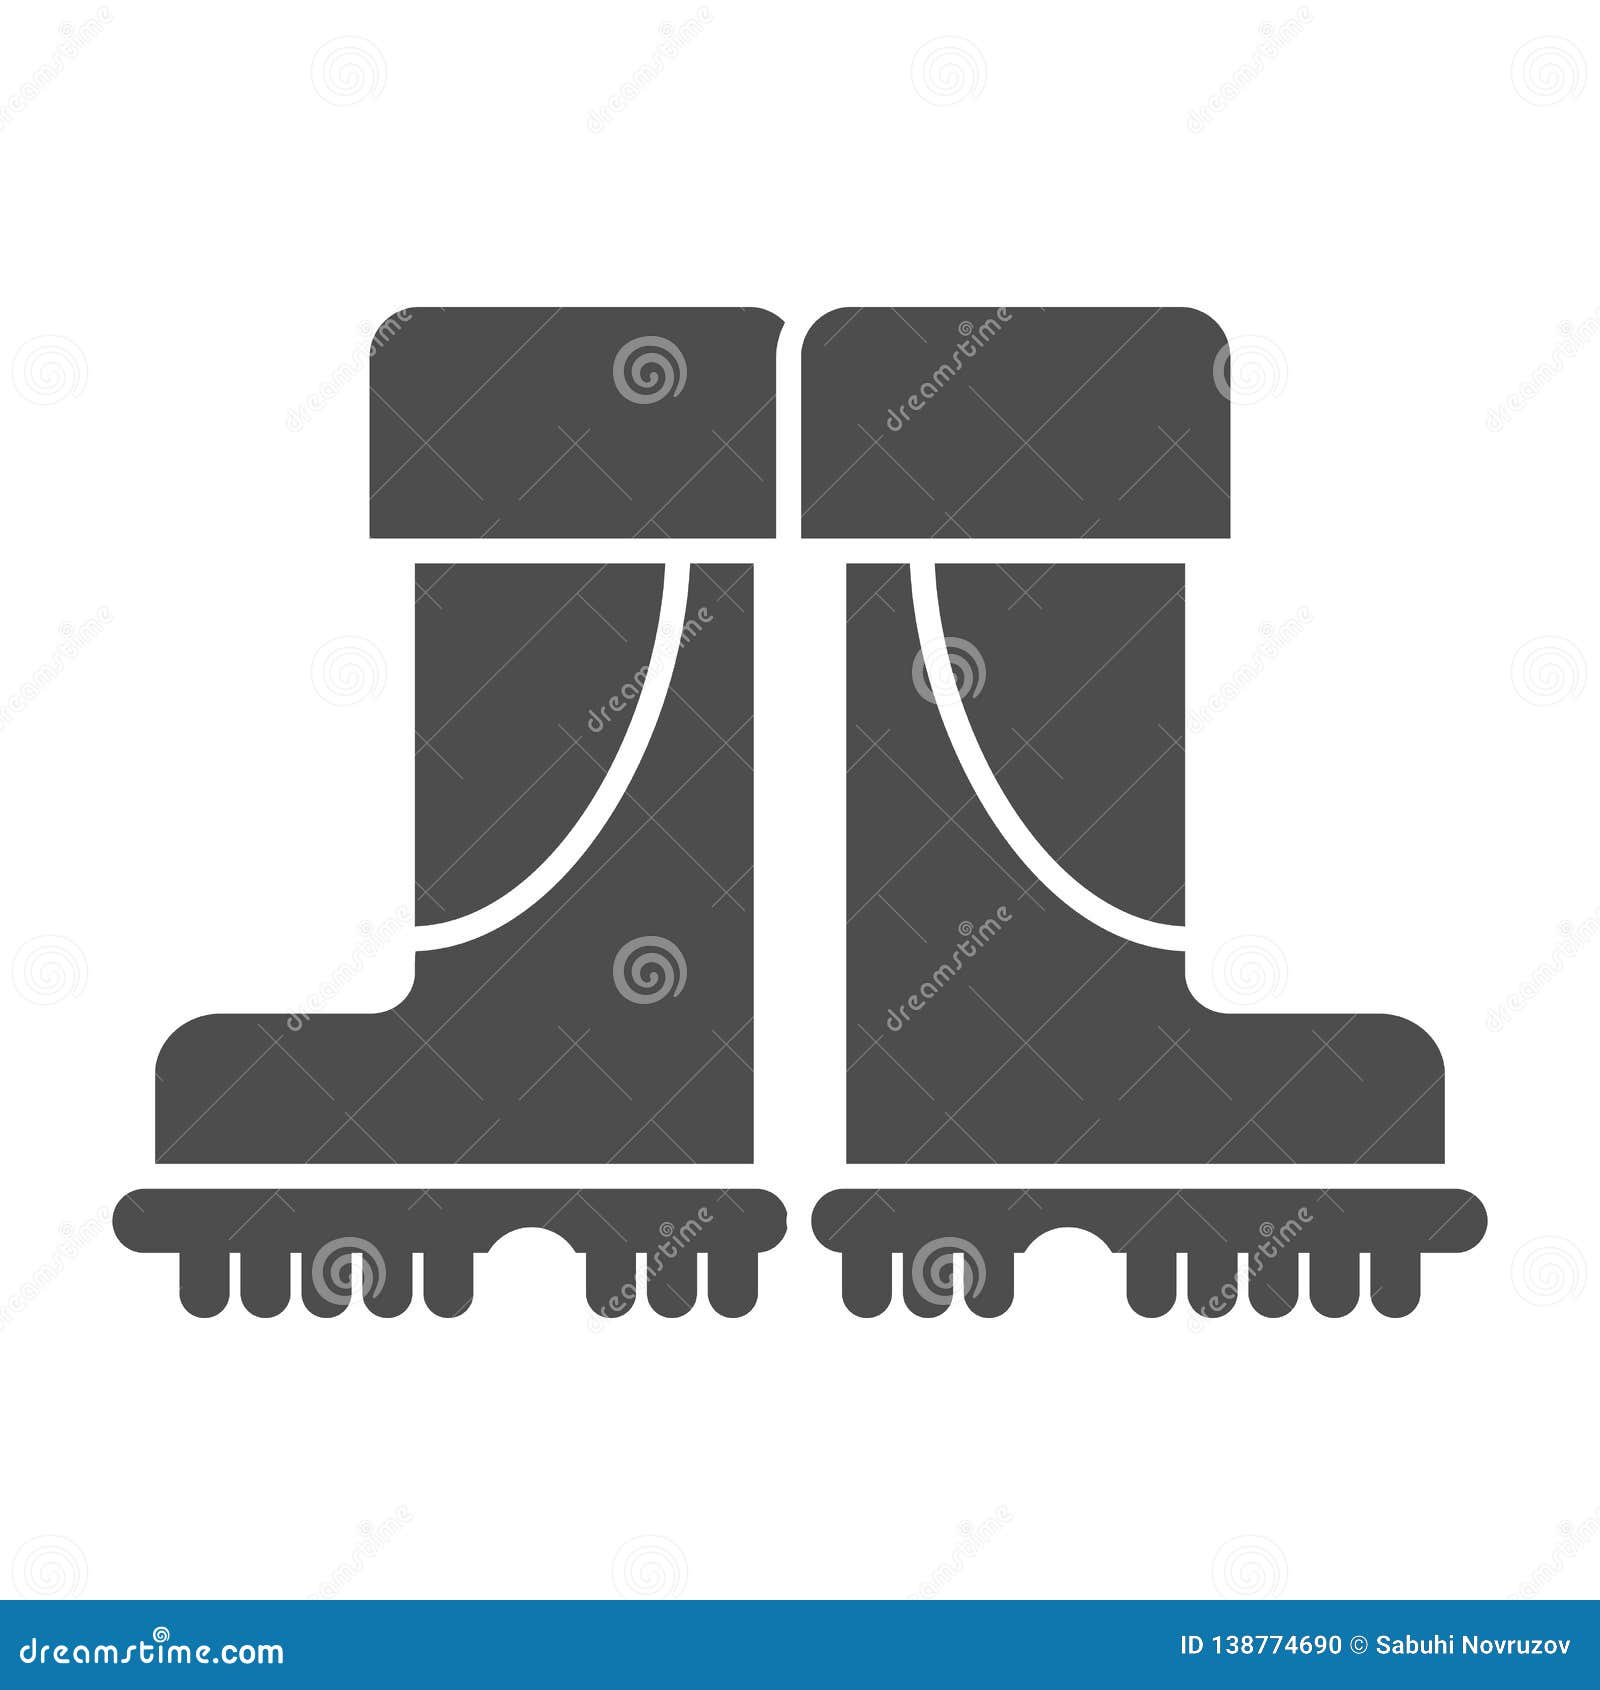 Rubber Boots Solid Icon. Fishing Boots Vector Illustration Isolated on ...